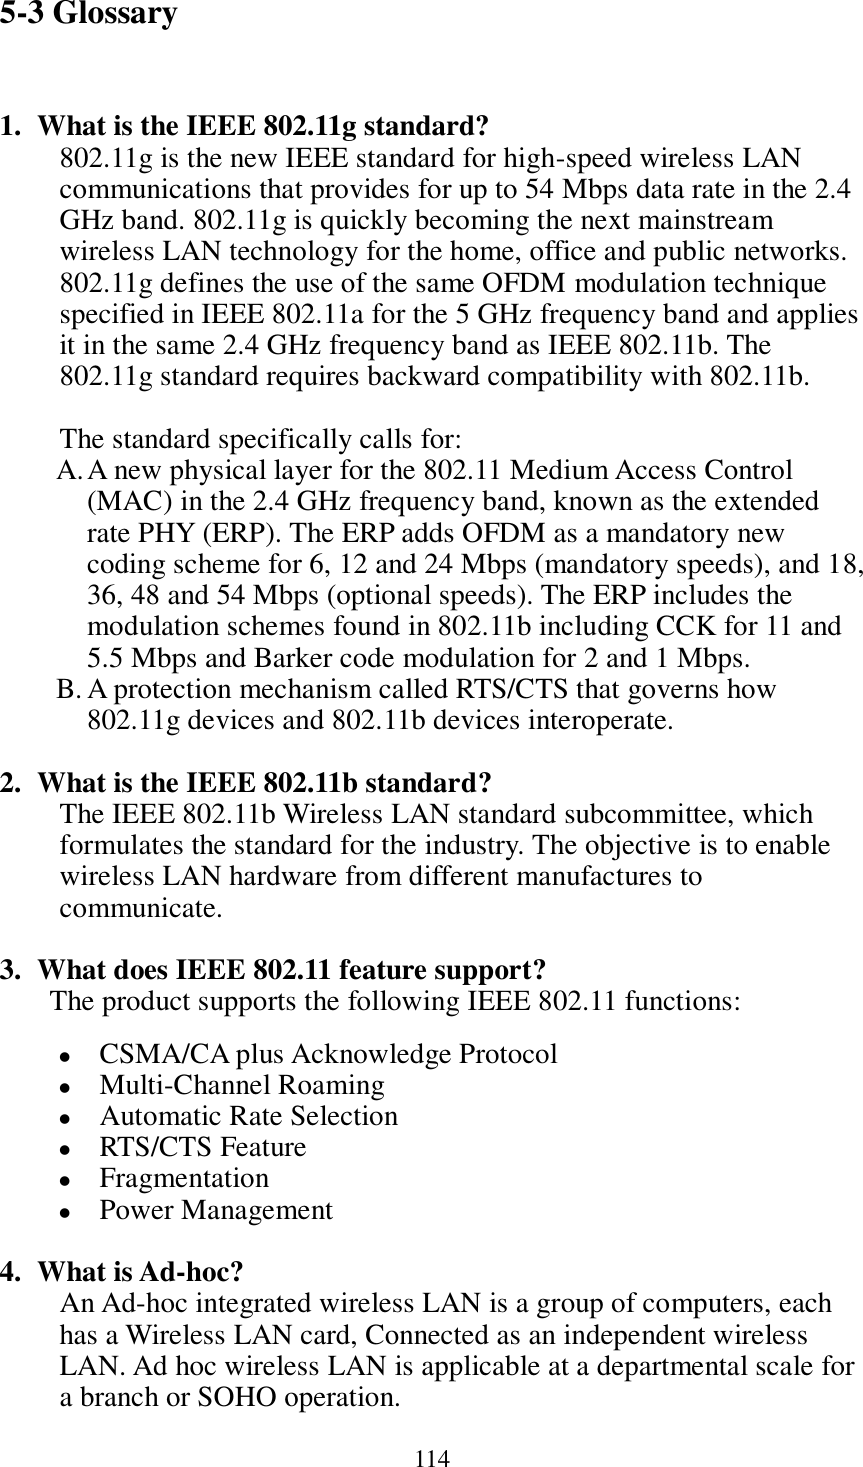 114 5-3 Glossary  1. What is the IEEE 802.11g standard? 802.11g is the new IEEE standard for high-speed wireless LAN communications that provides for up to 54 Mbps data rate in the 2.4 GHz band. 802.11g is quickly becoming the next mainstream wireless LAN technology for the home, office and public networks.   802.11g defines the use of the same OFDM modulation technique specified in IEEE 802.11a for the 5 GHz frequency band and applies it in the same 2.4 GHz frequency band as IEEE 802.11b. The 802.11g standard requires backward compatibility with 802.11b.  The standard specifically calls for:   A. A new physical layer for the 802.11 Medium Access Control (MAC) in the 2.4 GHz frequency band, known as the extended rate PHY (ERP). The ERP adds OFDM as a mandatory new coding scheme for 6, 12 and 24 Mbps (mandatory speeds), and 18, 36, 48 and 54 Mbps (optional speeds). The ERP includes the modulation schemes found in 802.11b including CCK for 11 and 5.5 Mbps and Barker code modulation for 2 and 1 Mbps. B. A protection mechanism called RTS/CTS that governs how 802.11g devices and 802.11b devices interoperate.  2. What is the IEEE 802.11b standard? The IEEE 802.11b Wireless LAN standard subcommittee, which formulates the standard for the industry. The objective is to enable wireless LAN hardware from different manufactures to communicate.  3. What does IEEE 802.11 feature support? The product supports the following IEEE 802.11 functions:  CSMA/CA plus Acknowledge Protocol  Multi-Channel Roaming  Automatic Rate Selection  RTS/CTS Feature  Fragmentation  Power Management  4. What is Ad-hoc? An Ad-hoc integrated wireless LAN is a group of computers, each has a Wireless LAN card, Connected as an independent wireless LAN. Ad hoc wireless LAN is applicable at a departmental scale for a branch or SOHO operation. 